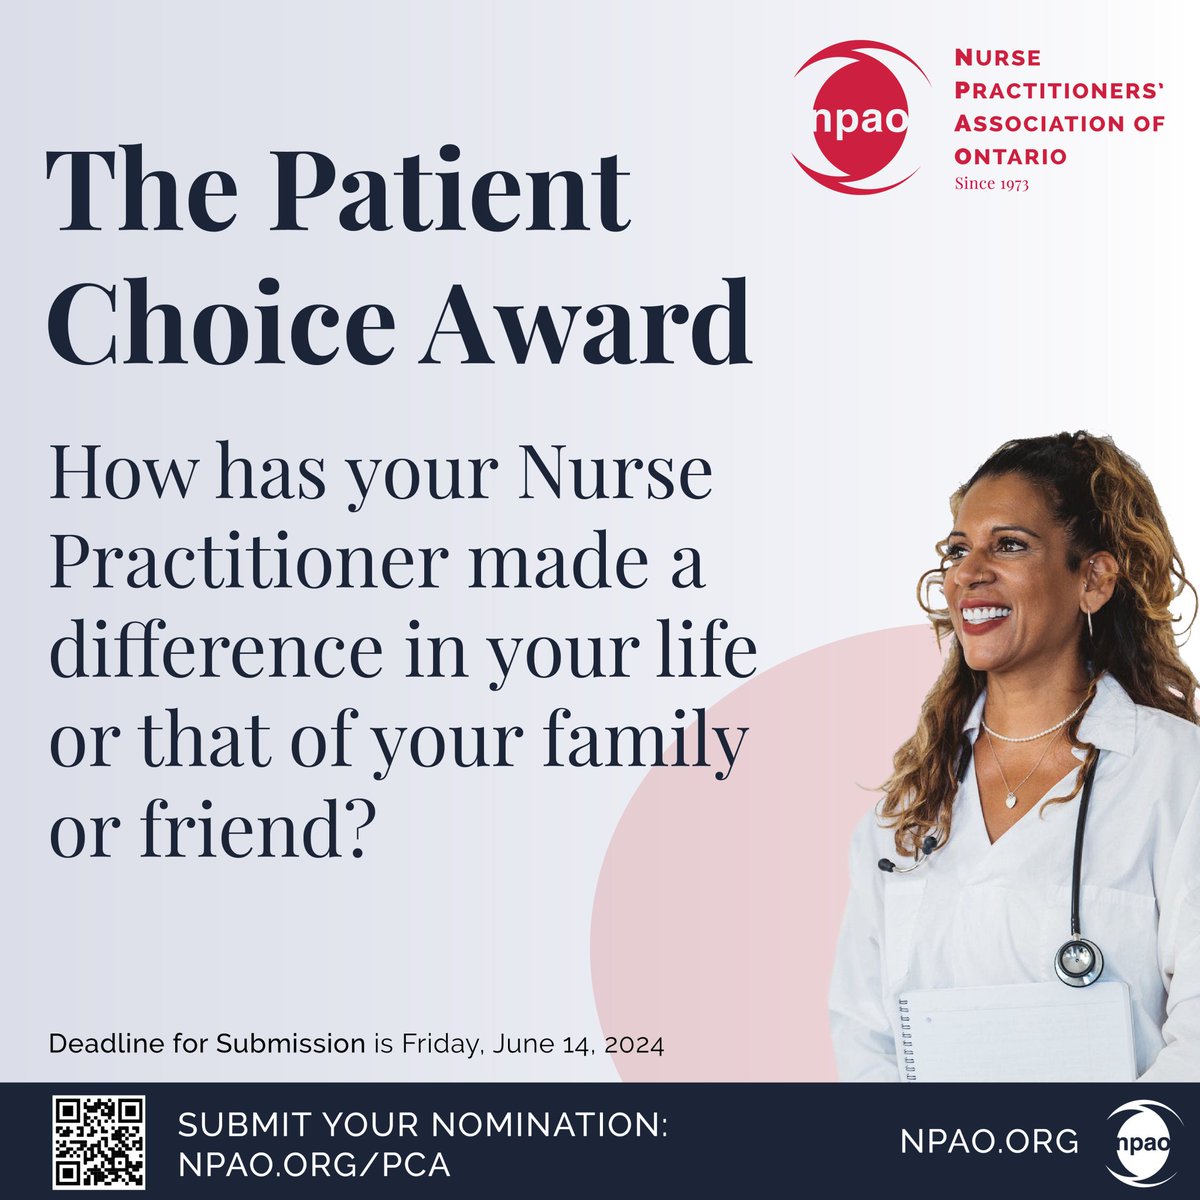 Now’s your chance to nominate a Nurse Practitioner for the Patient Choice Award! How has your Nurse Practitioner made a difference in your life or that of your family or friend? Submit your nomination: npao.org/pca